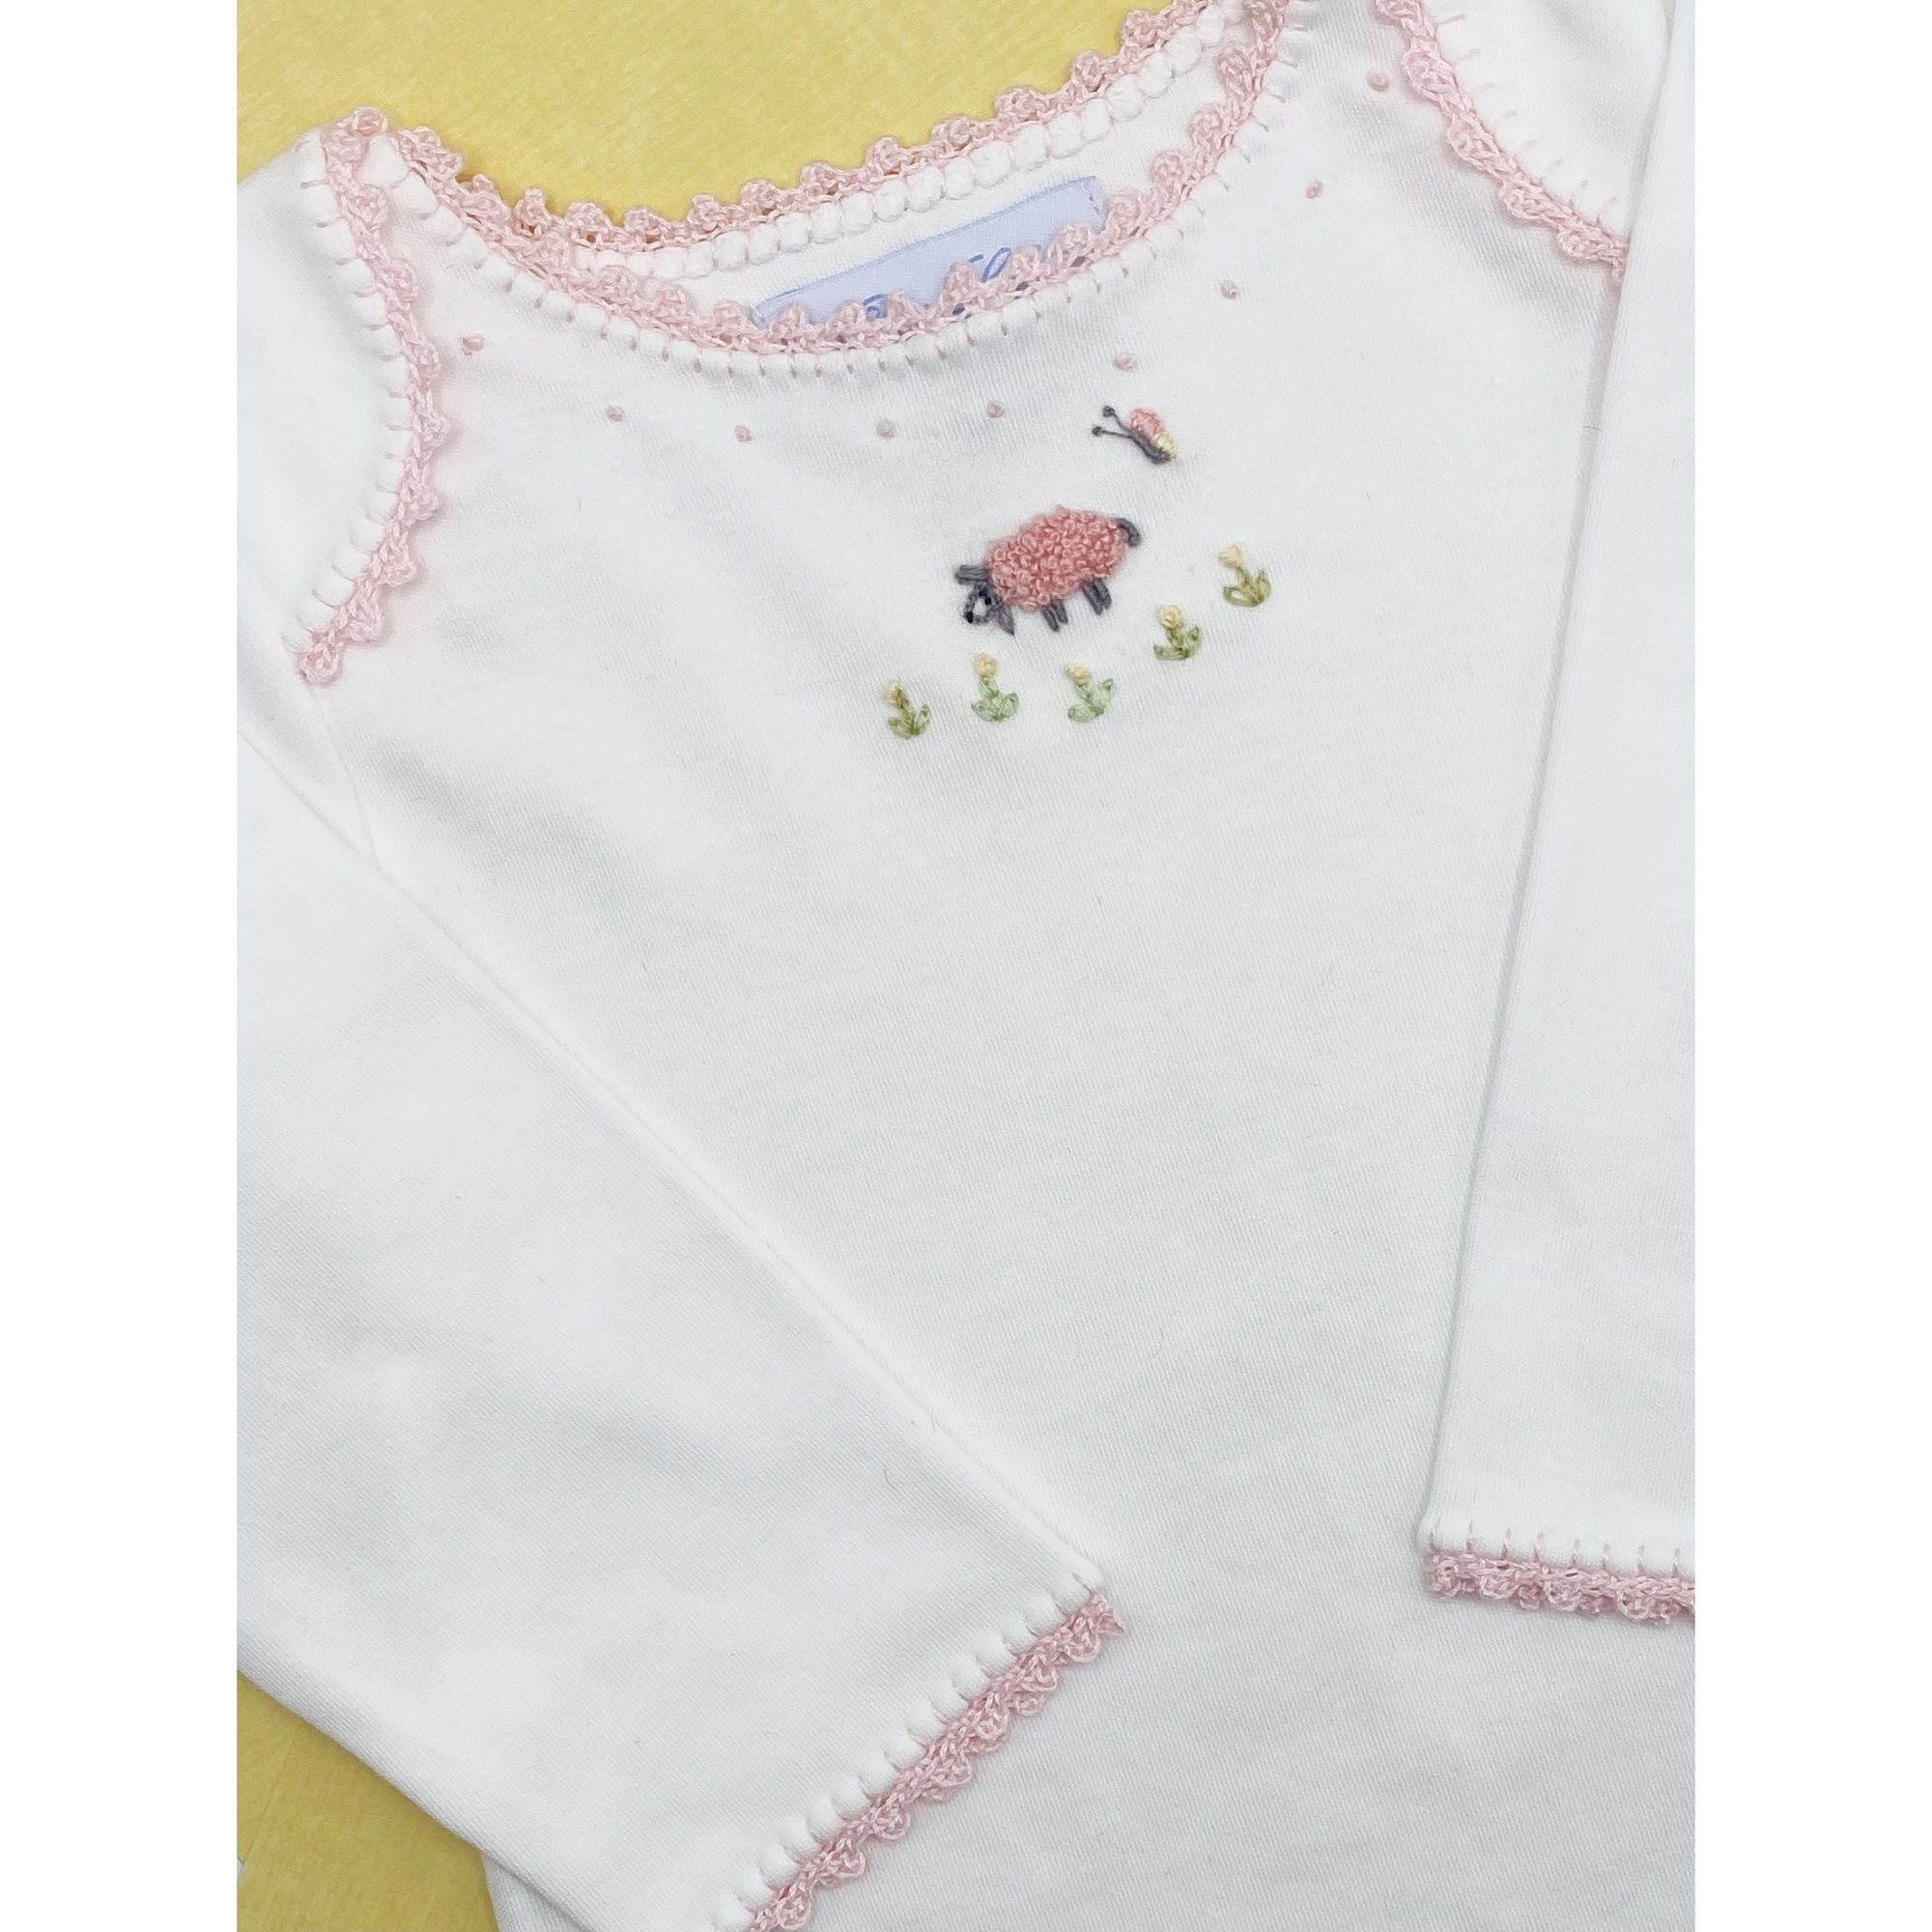 Embellished Hand Embroidered Baby Outfit